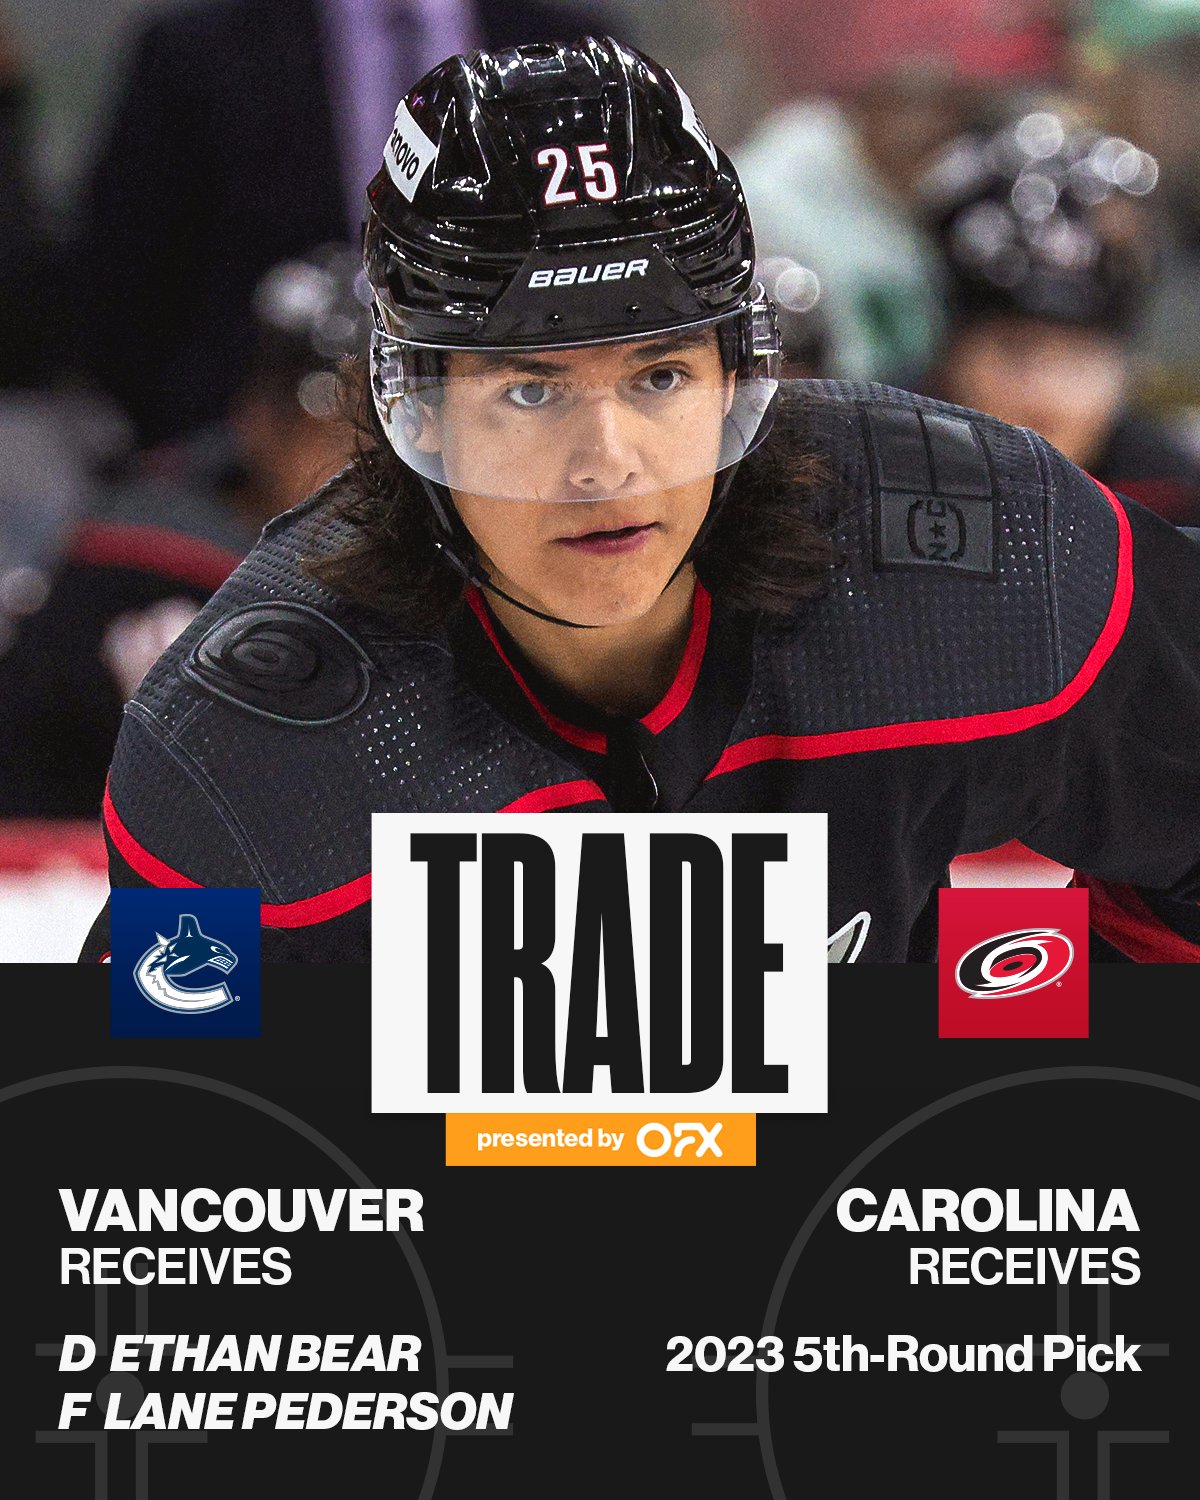 NHL - WE'VE GOT A TRADE 🔁 Ethan Bear and Lane Pederson are heading to the  Vancouver Canucks, while the Carolina Hurricanes receive a 5th-round pick  in the 2023 #NHLDraft.